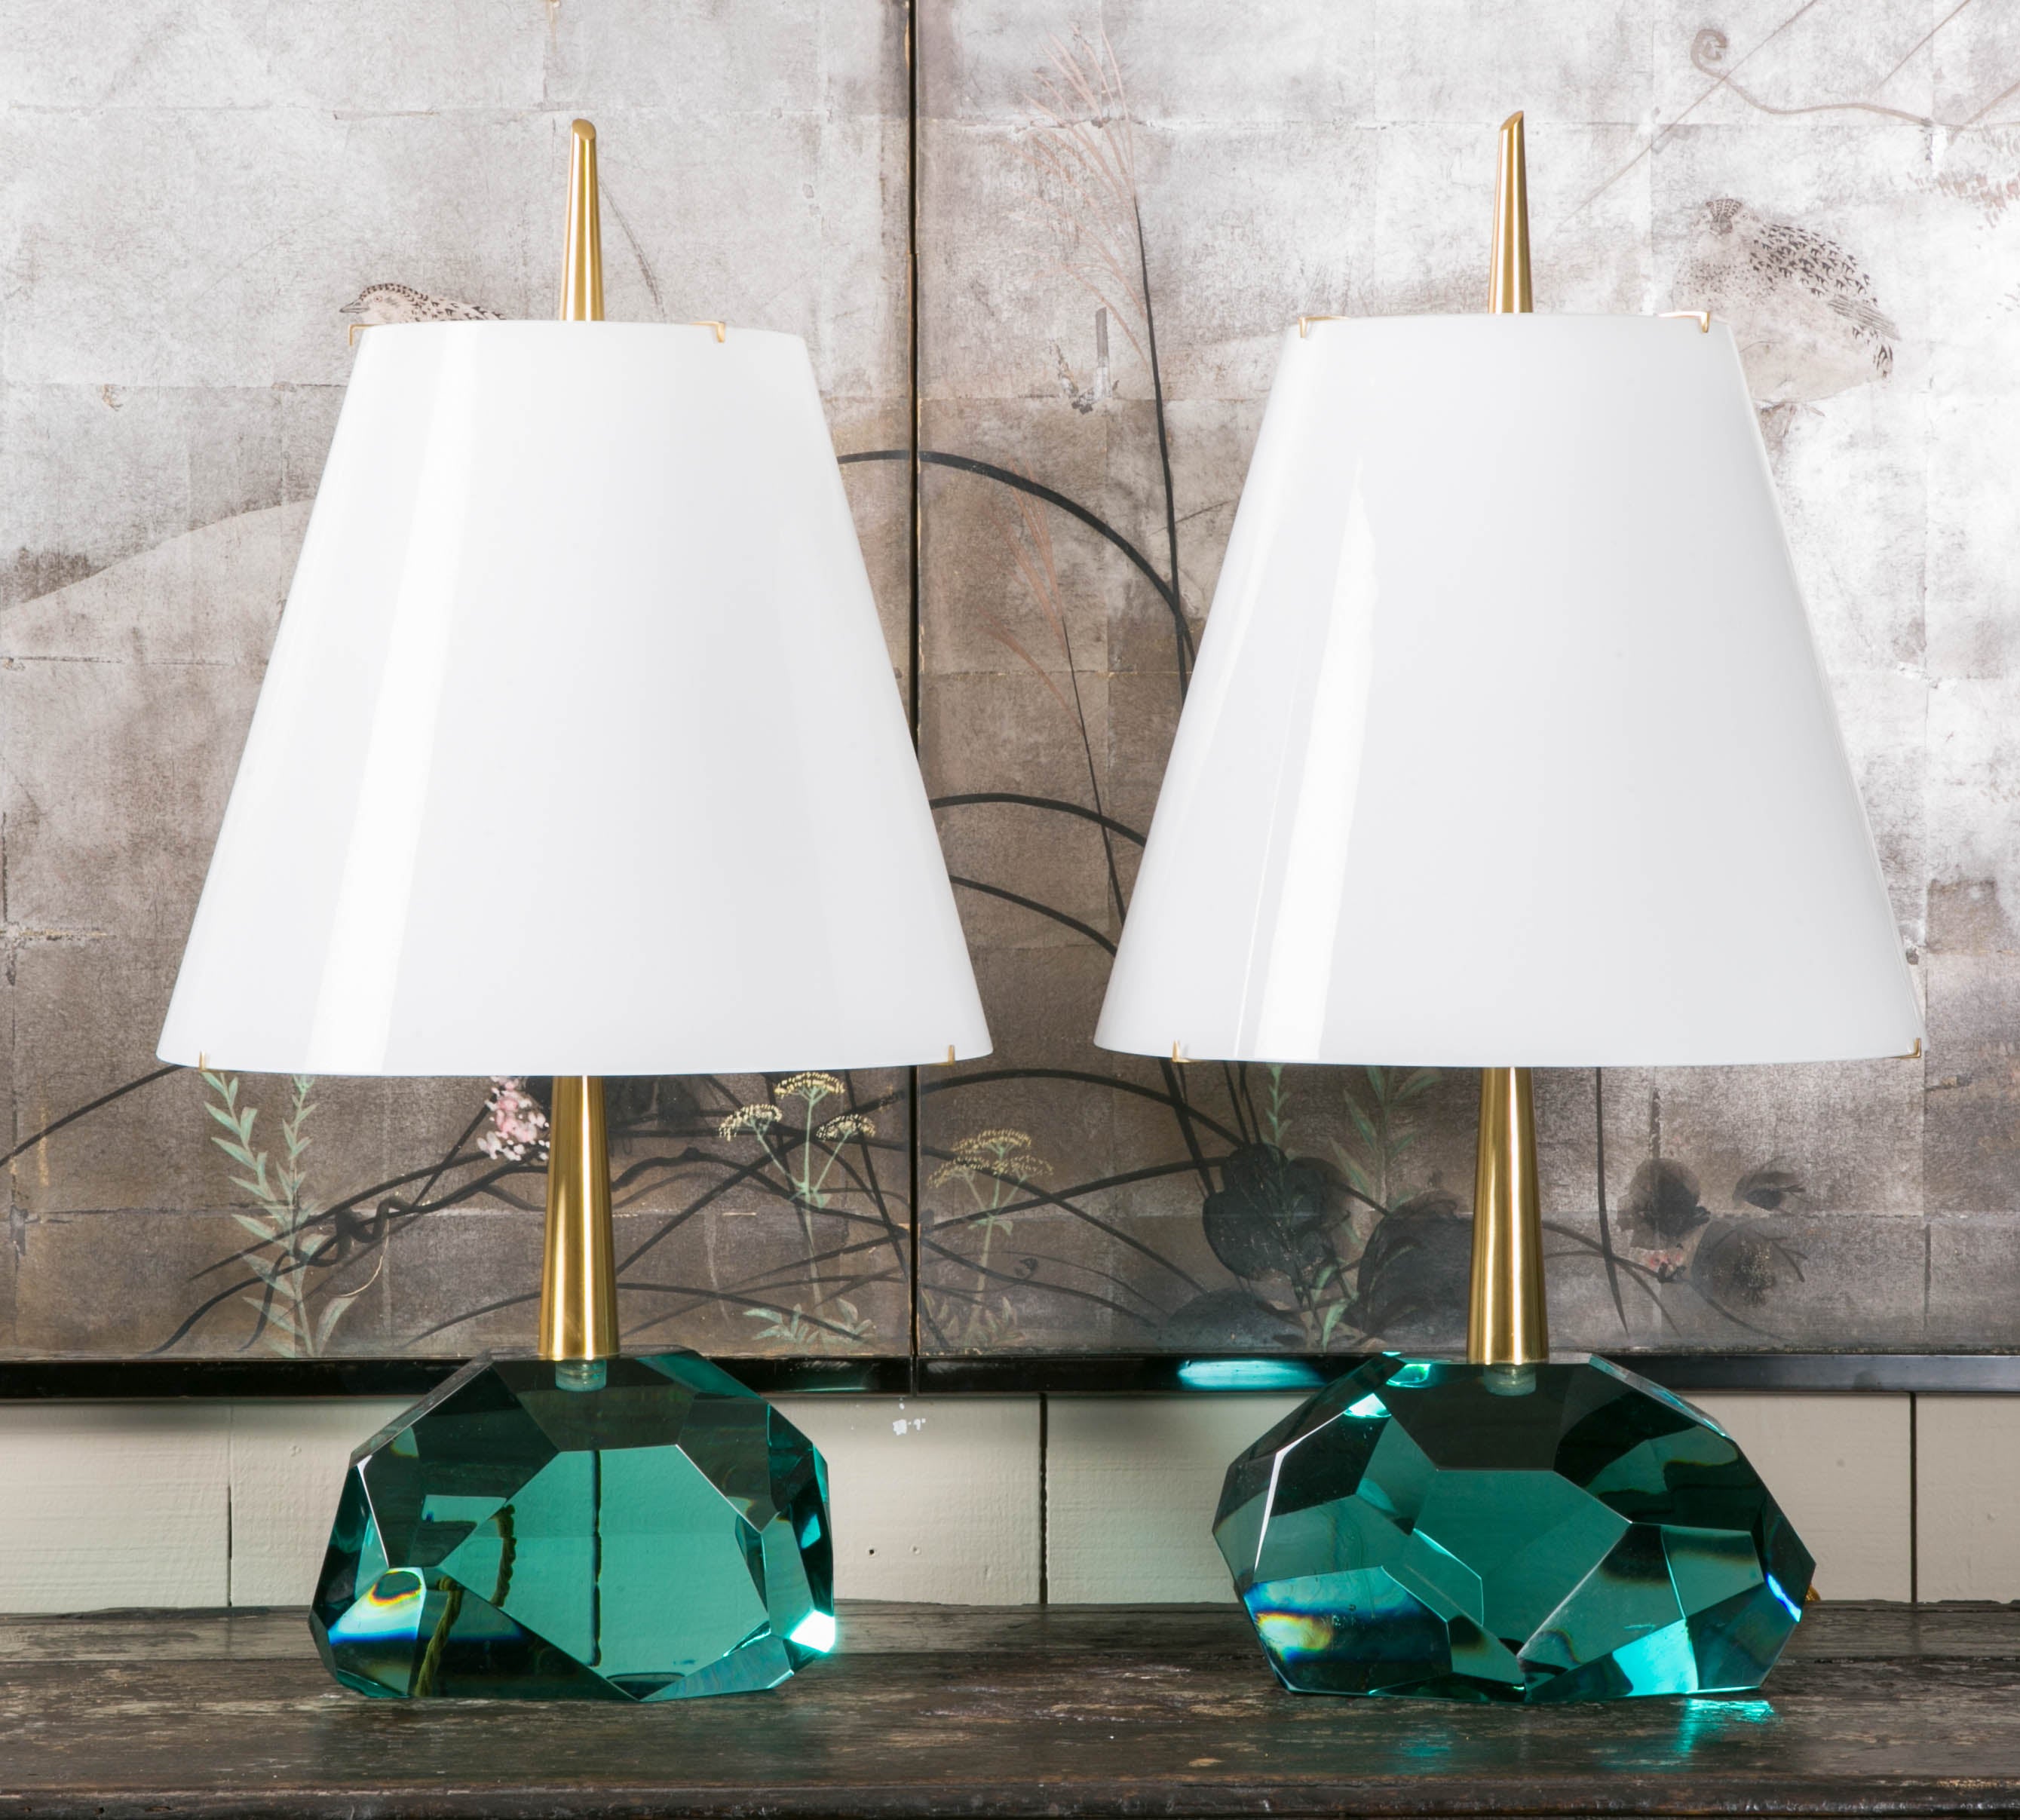 Rare Pair of Murano Glass Table Lamps Signed by Roberto Giulio RIDA For Sale